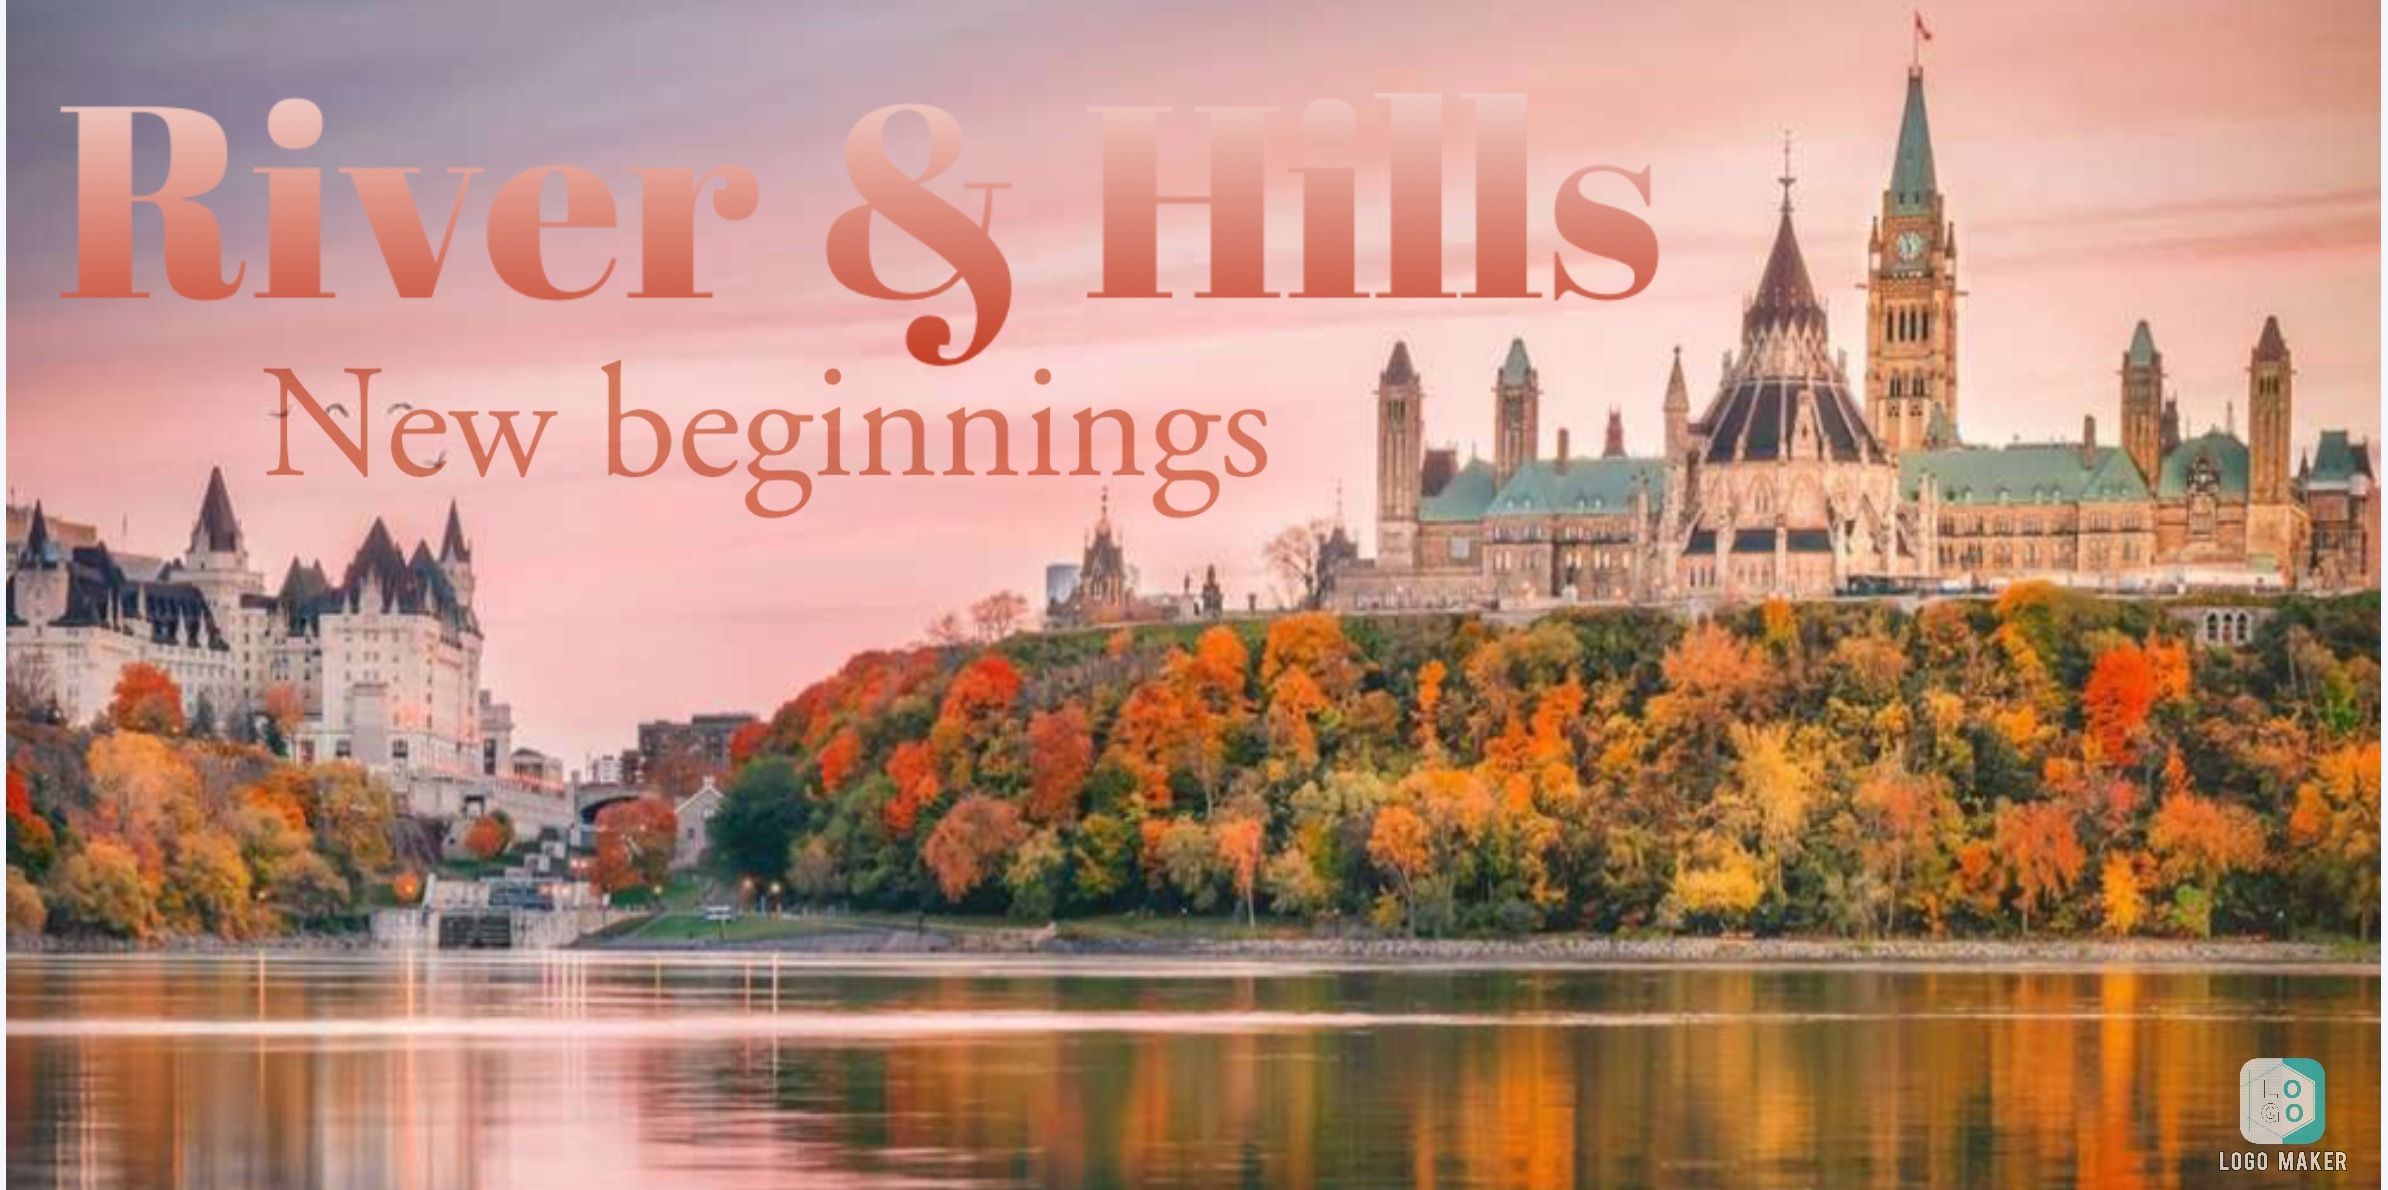 River and Hills, New Beginning